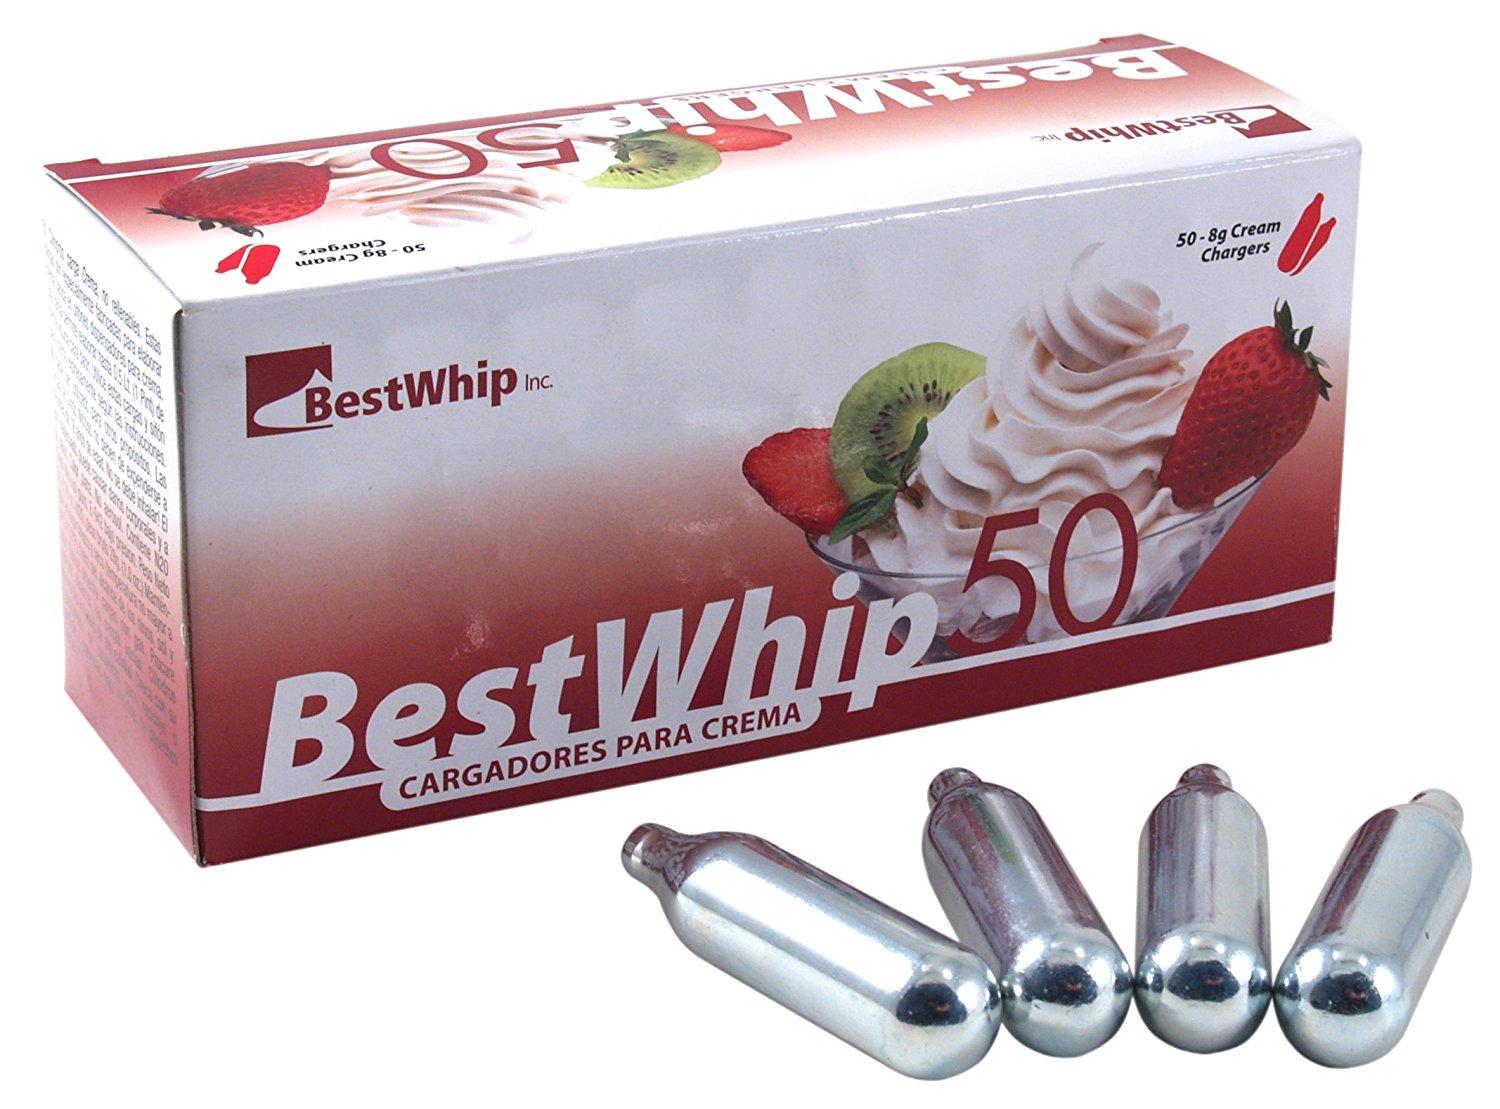 bestwhip cream chargers